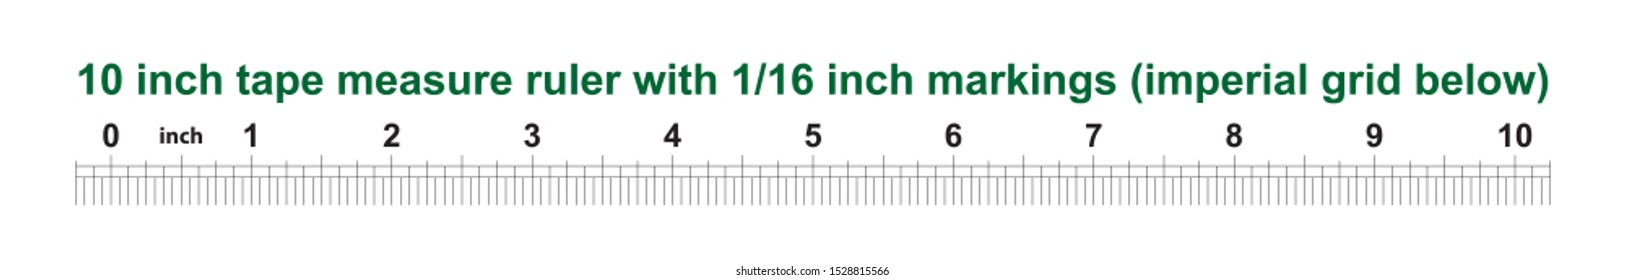 how to measure inches with a ruler